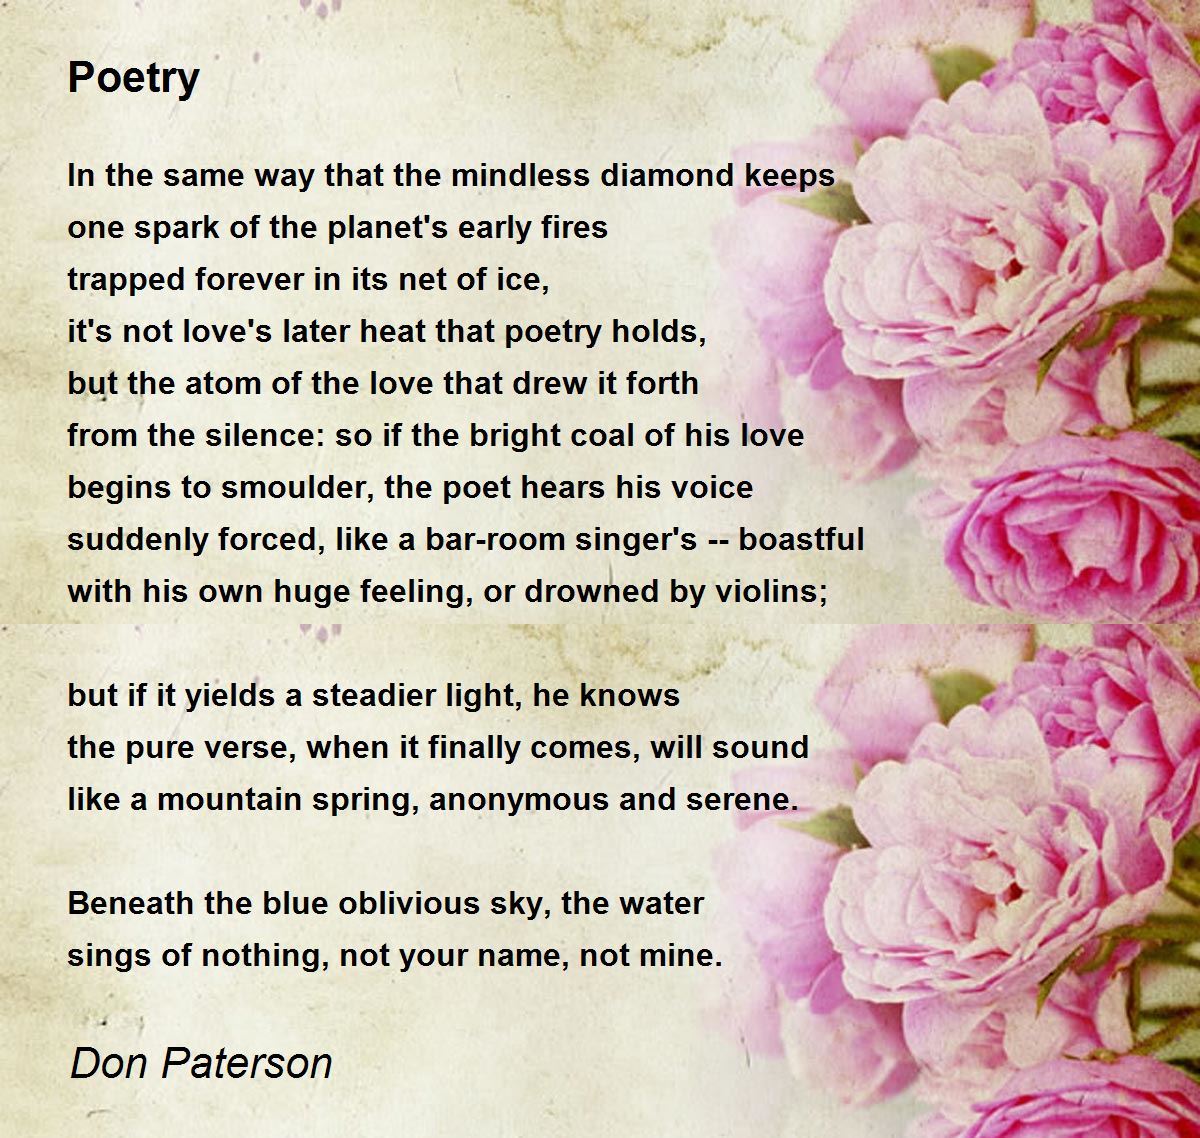 Falling Back In Love Quotes: Poetry Poem By Don Paterson.